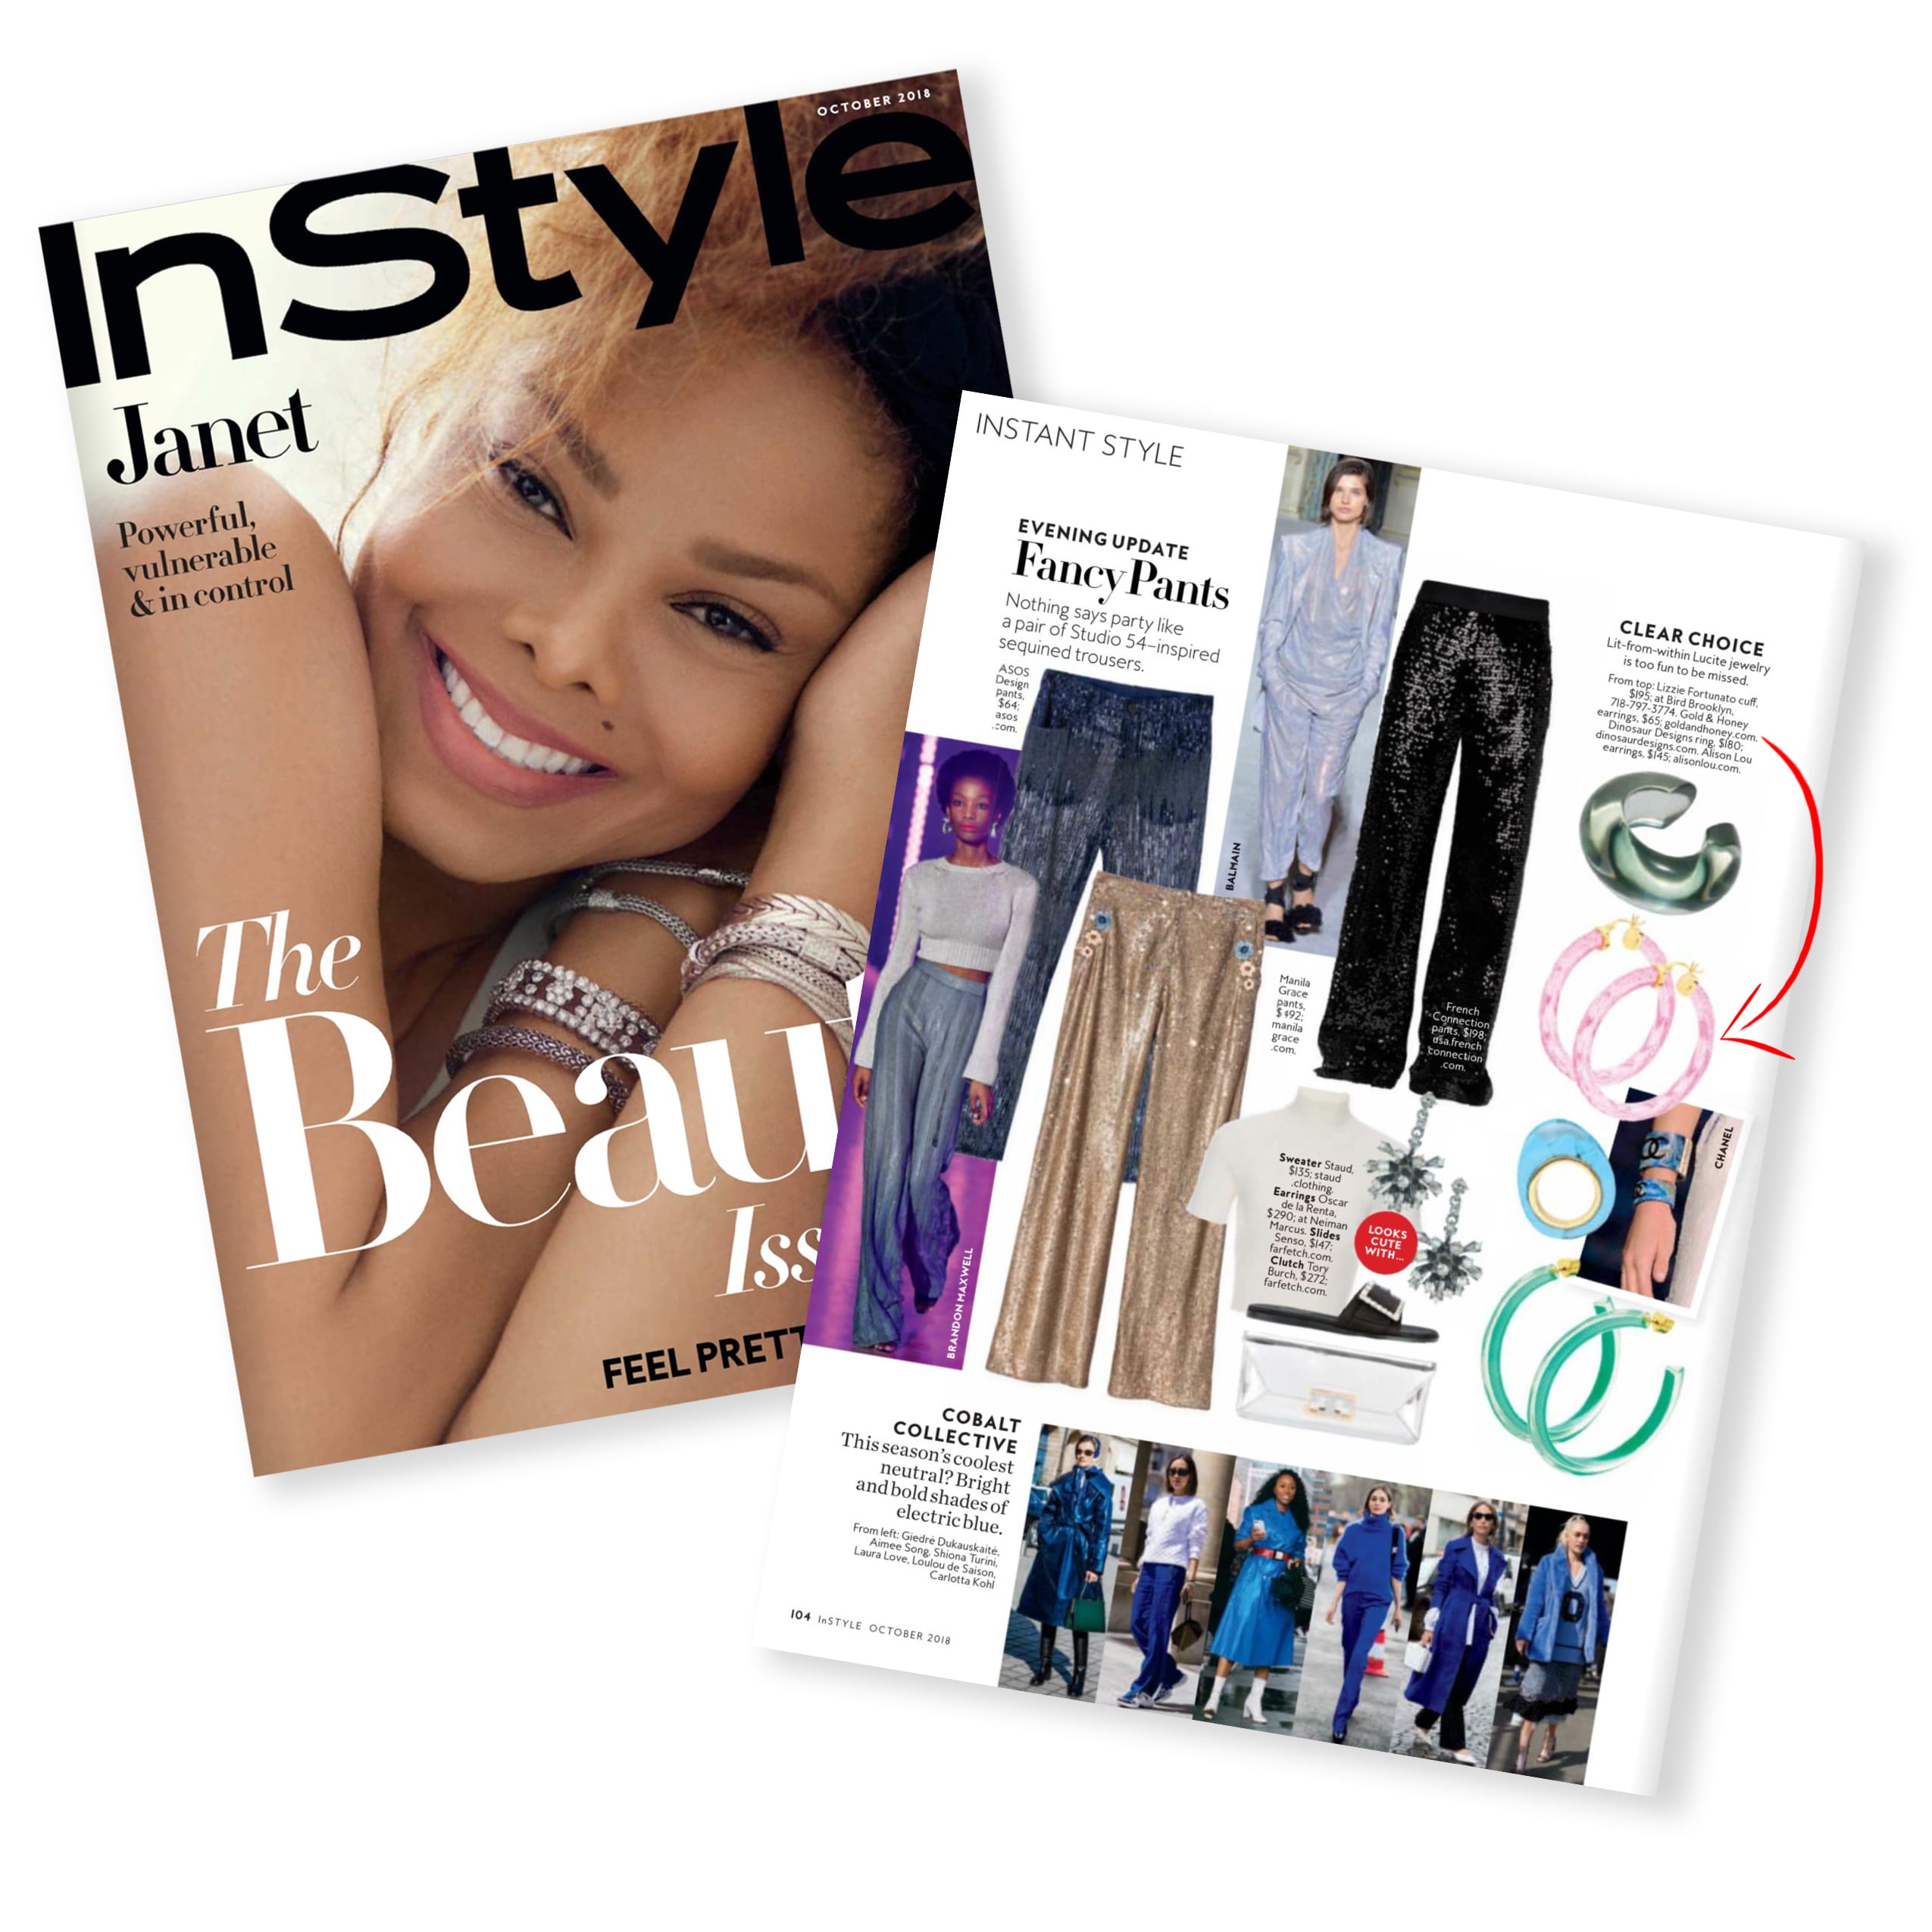 Our Pink Diamond Cut hoops were featured in Instyle Magazine!